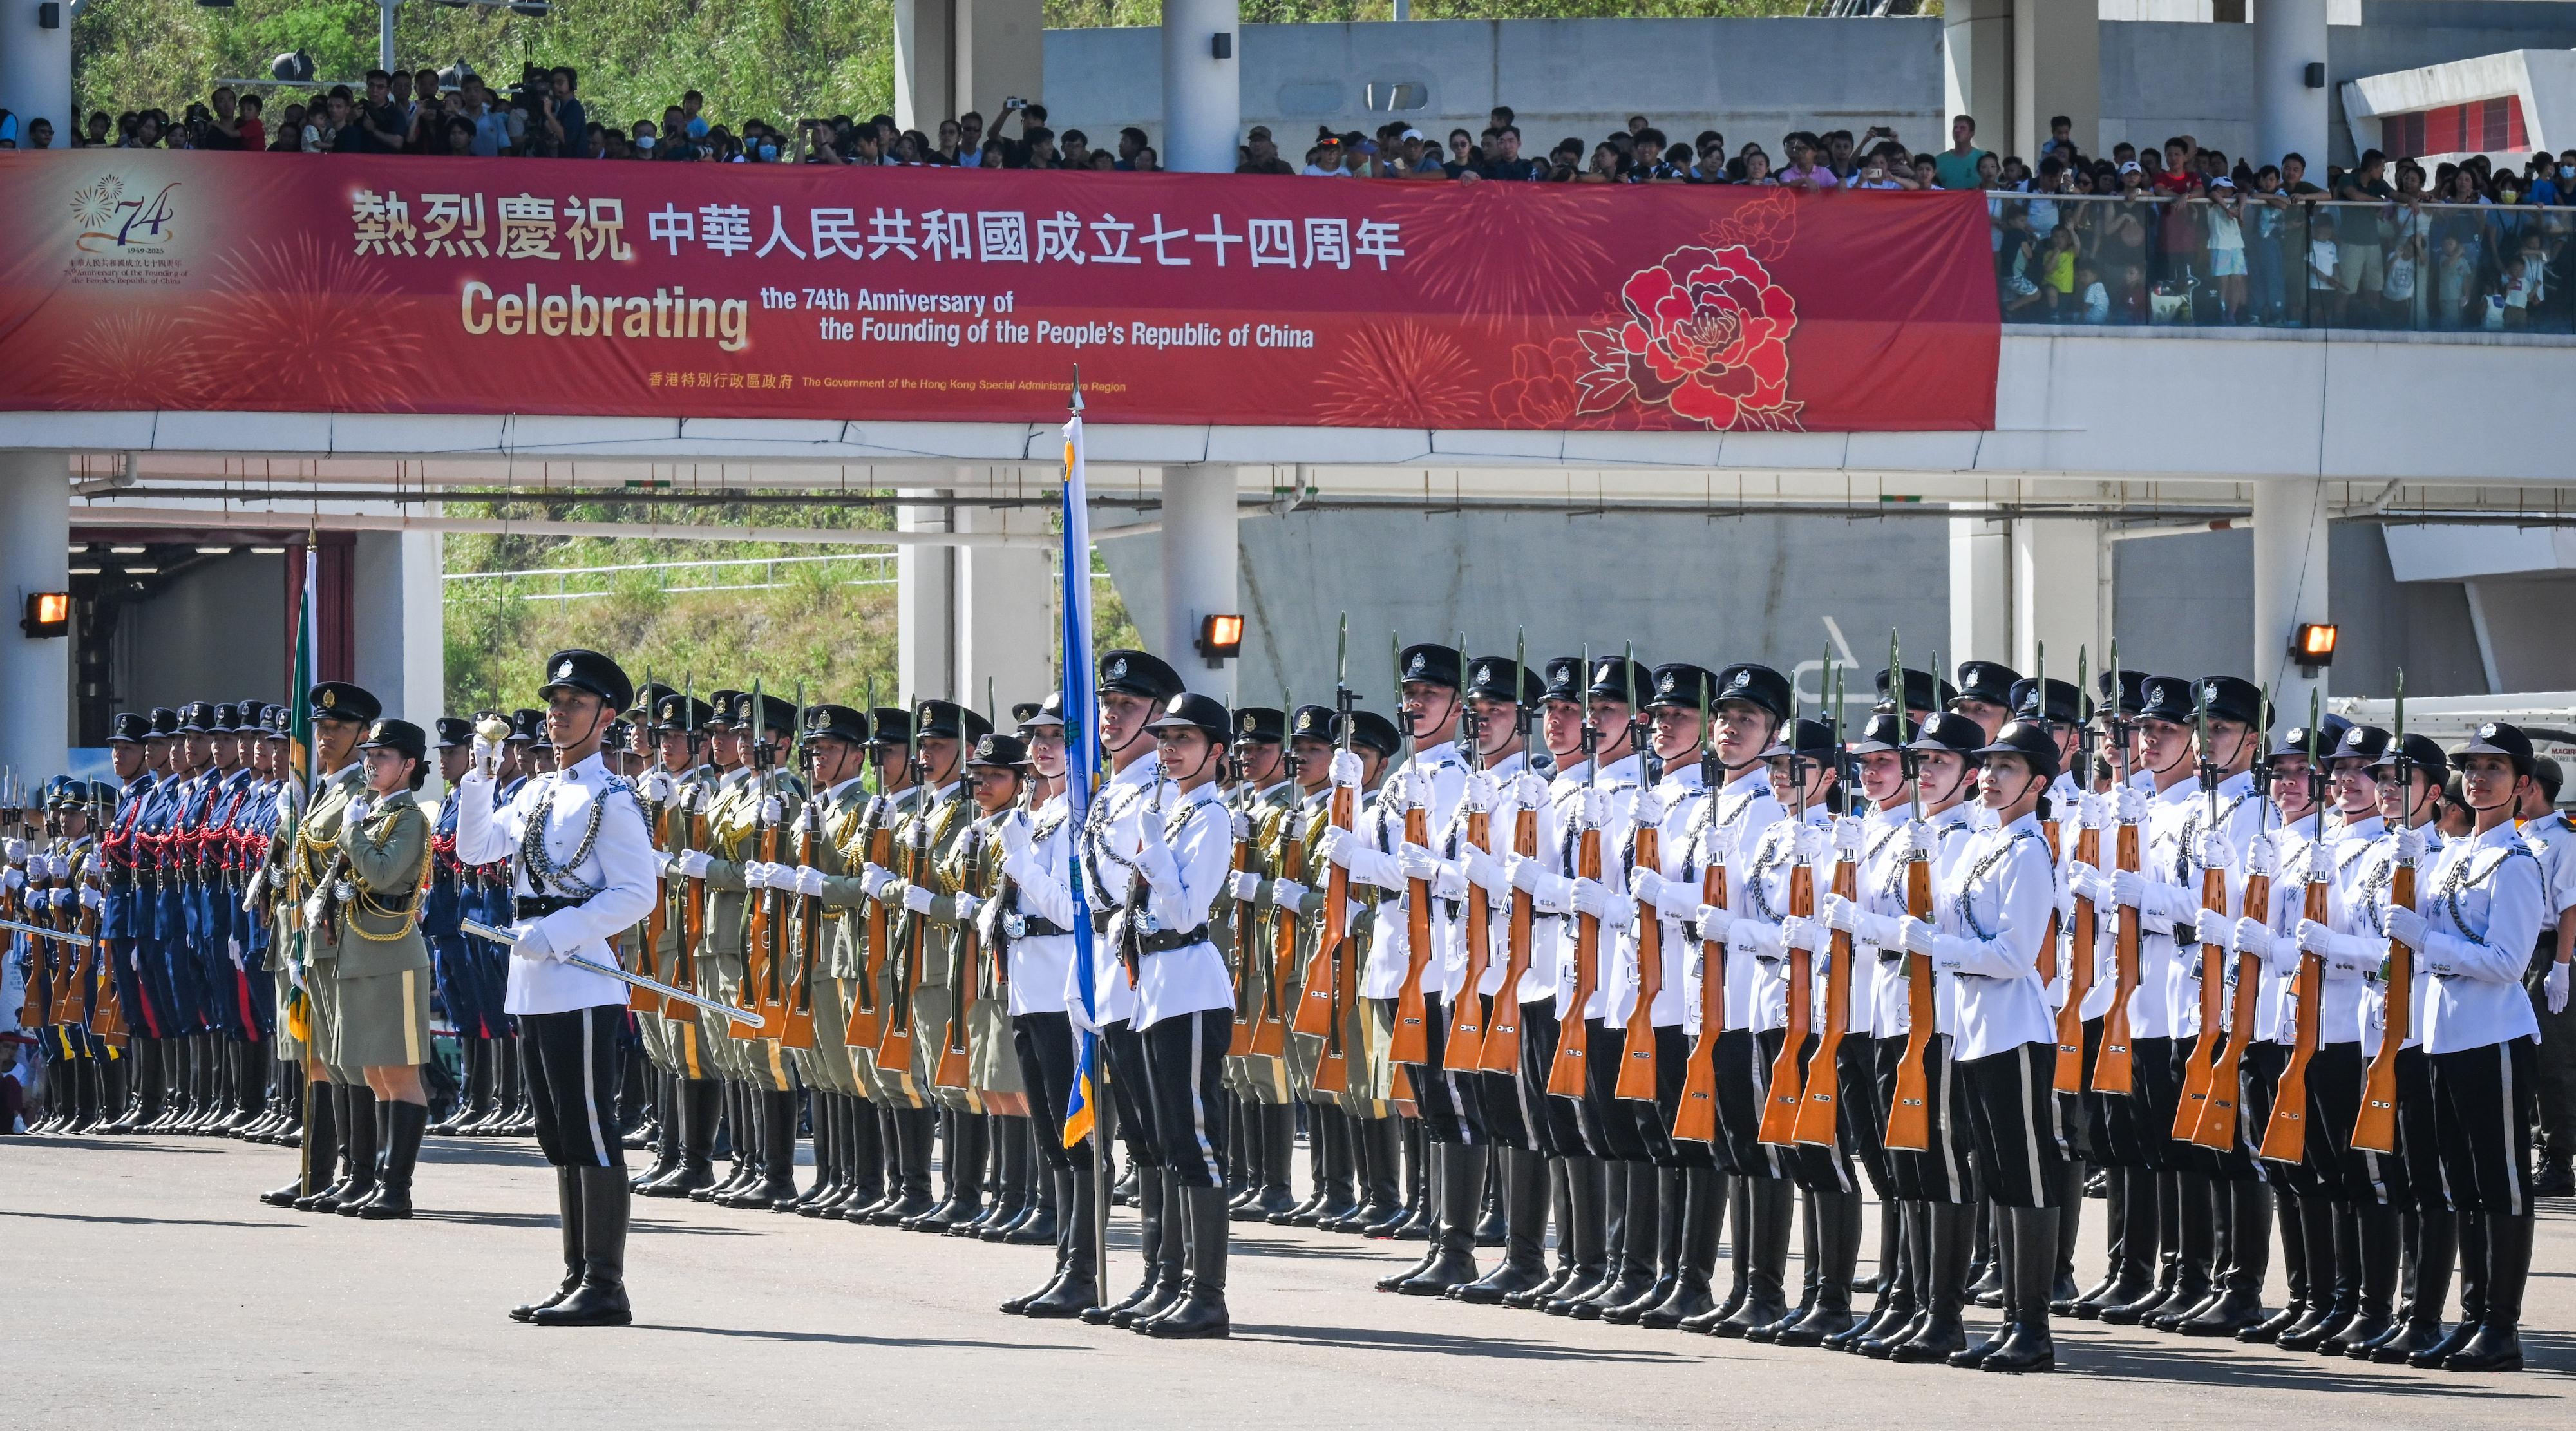 The Security Bureau led its disciplined services and auxiliary services, together with youth uniformed groups, to hold the Parade by Disciplined Services and Youth Groups cum Carnival for Celebrating the 74th Anniversary of the Founding of the People's Republic of China at the Fire and Ambulance Services Academy in Tseung Kwan O today (October 1) to celebrate the National Day with members of the public. Photo shows the disciplined services ceremonial guard and the youth uniformed groups marching into the venue with the Chinese-style foot drill.